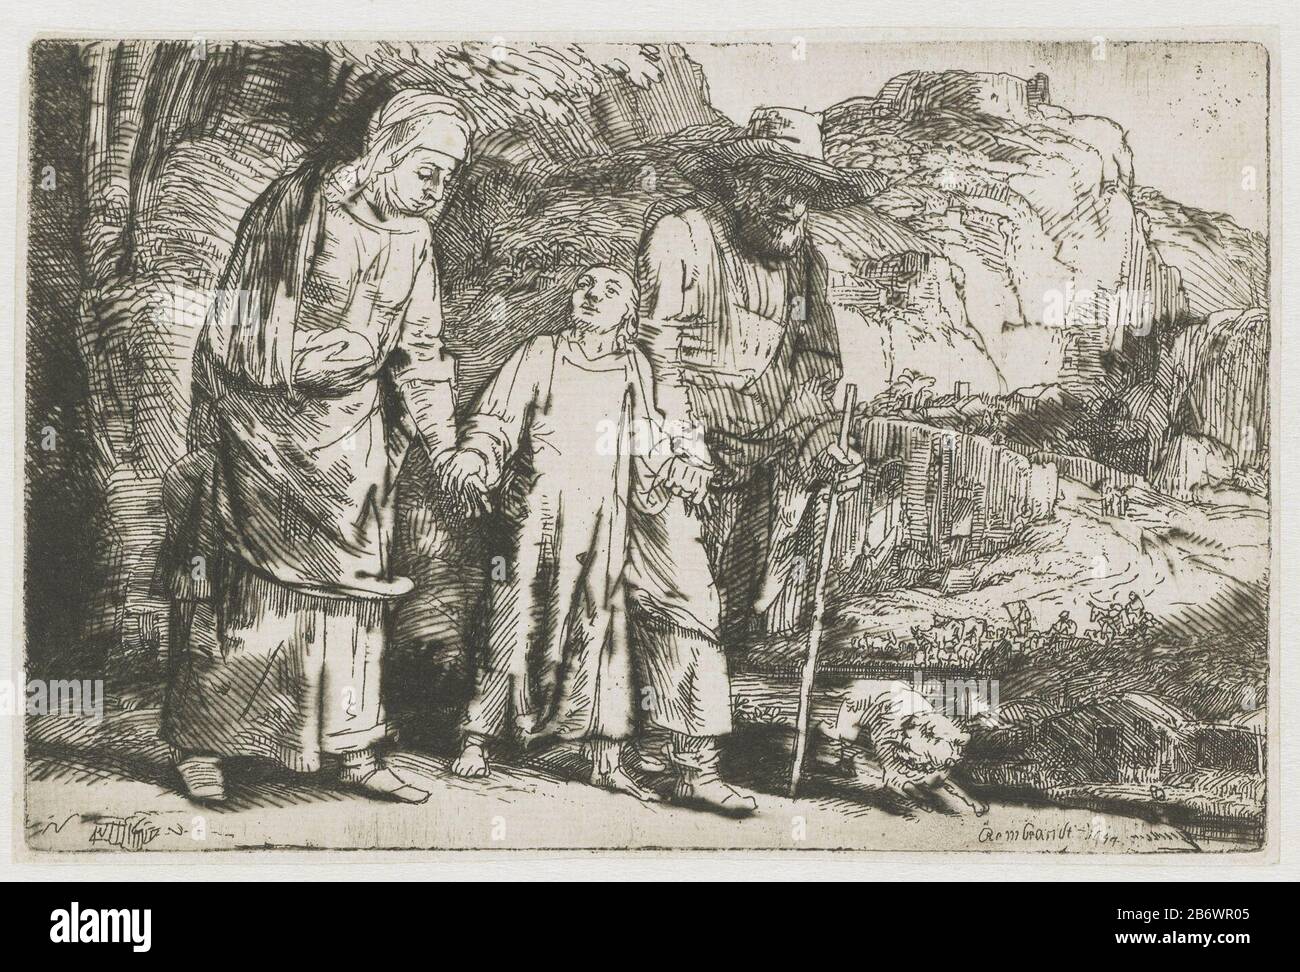 Jezus keert terug uit de tempel met Jozef en Maria Jesus returned from the temple by Mary and Joseph Property Type: picture Item number: RP-P-1962-32Catalogusreferentie: New Hollstein Dutch 276-1 (1) Bartsch 60-1 (1) 60-1 Hollstein Dutch (1) Markings / Brands: signature and date lower right: Rembrandt f 1654'merk, verso left: Lugt 2228merk, verso left: Lugt 402inscriptie, verso central pencil: 'C. 17855 (Colnaghi number) brand, verso left: Lugt 3020-3023 Manufacturer : printmaker Rembrandt van Rijn (listed building) in its design: Rembrandt van Rijn Date: 1654 Physical Features: Etching and dr Stock Photo